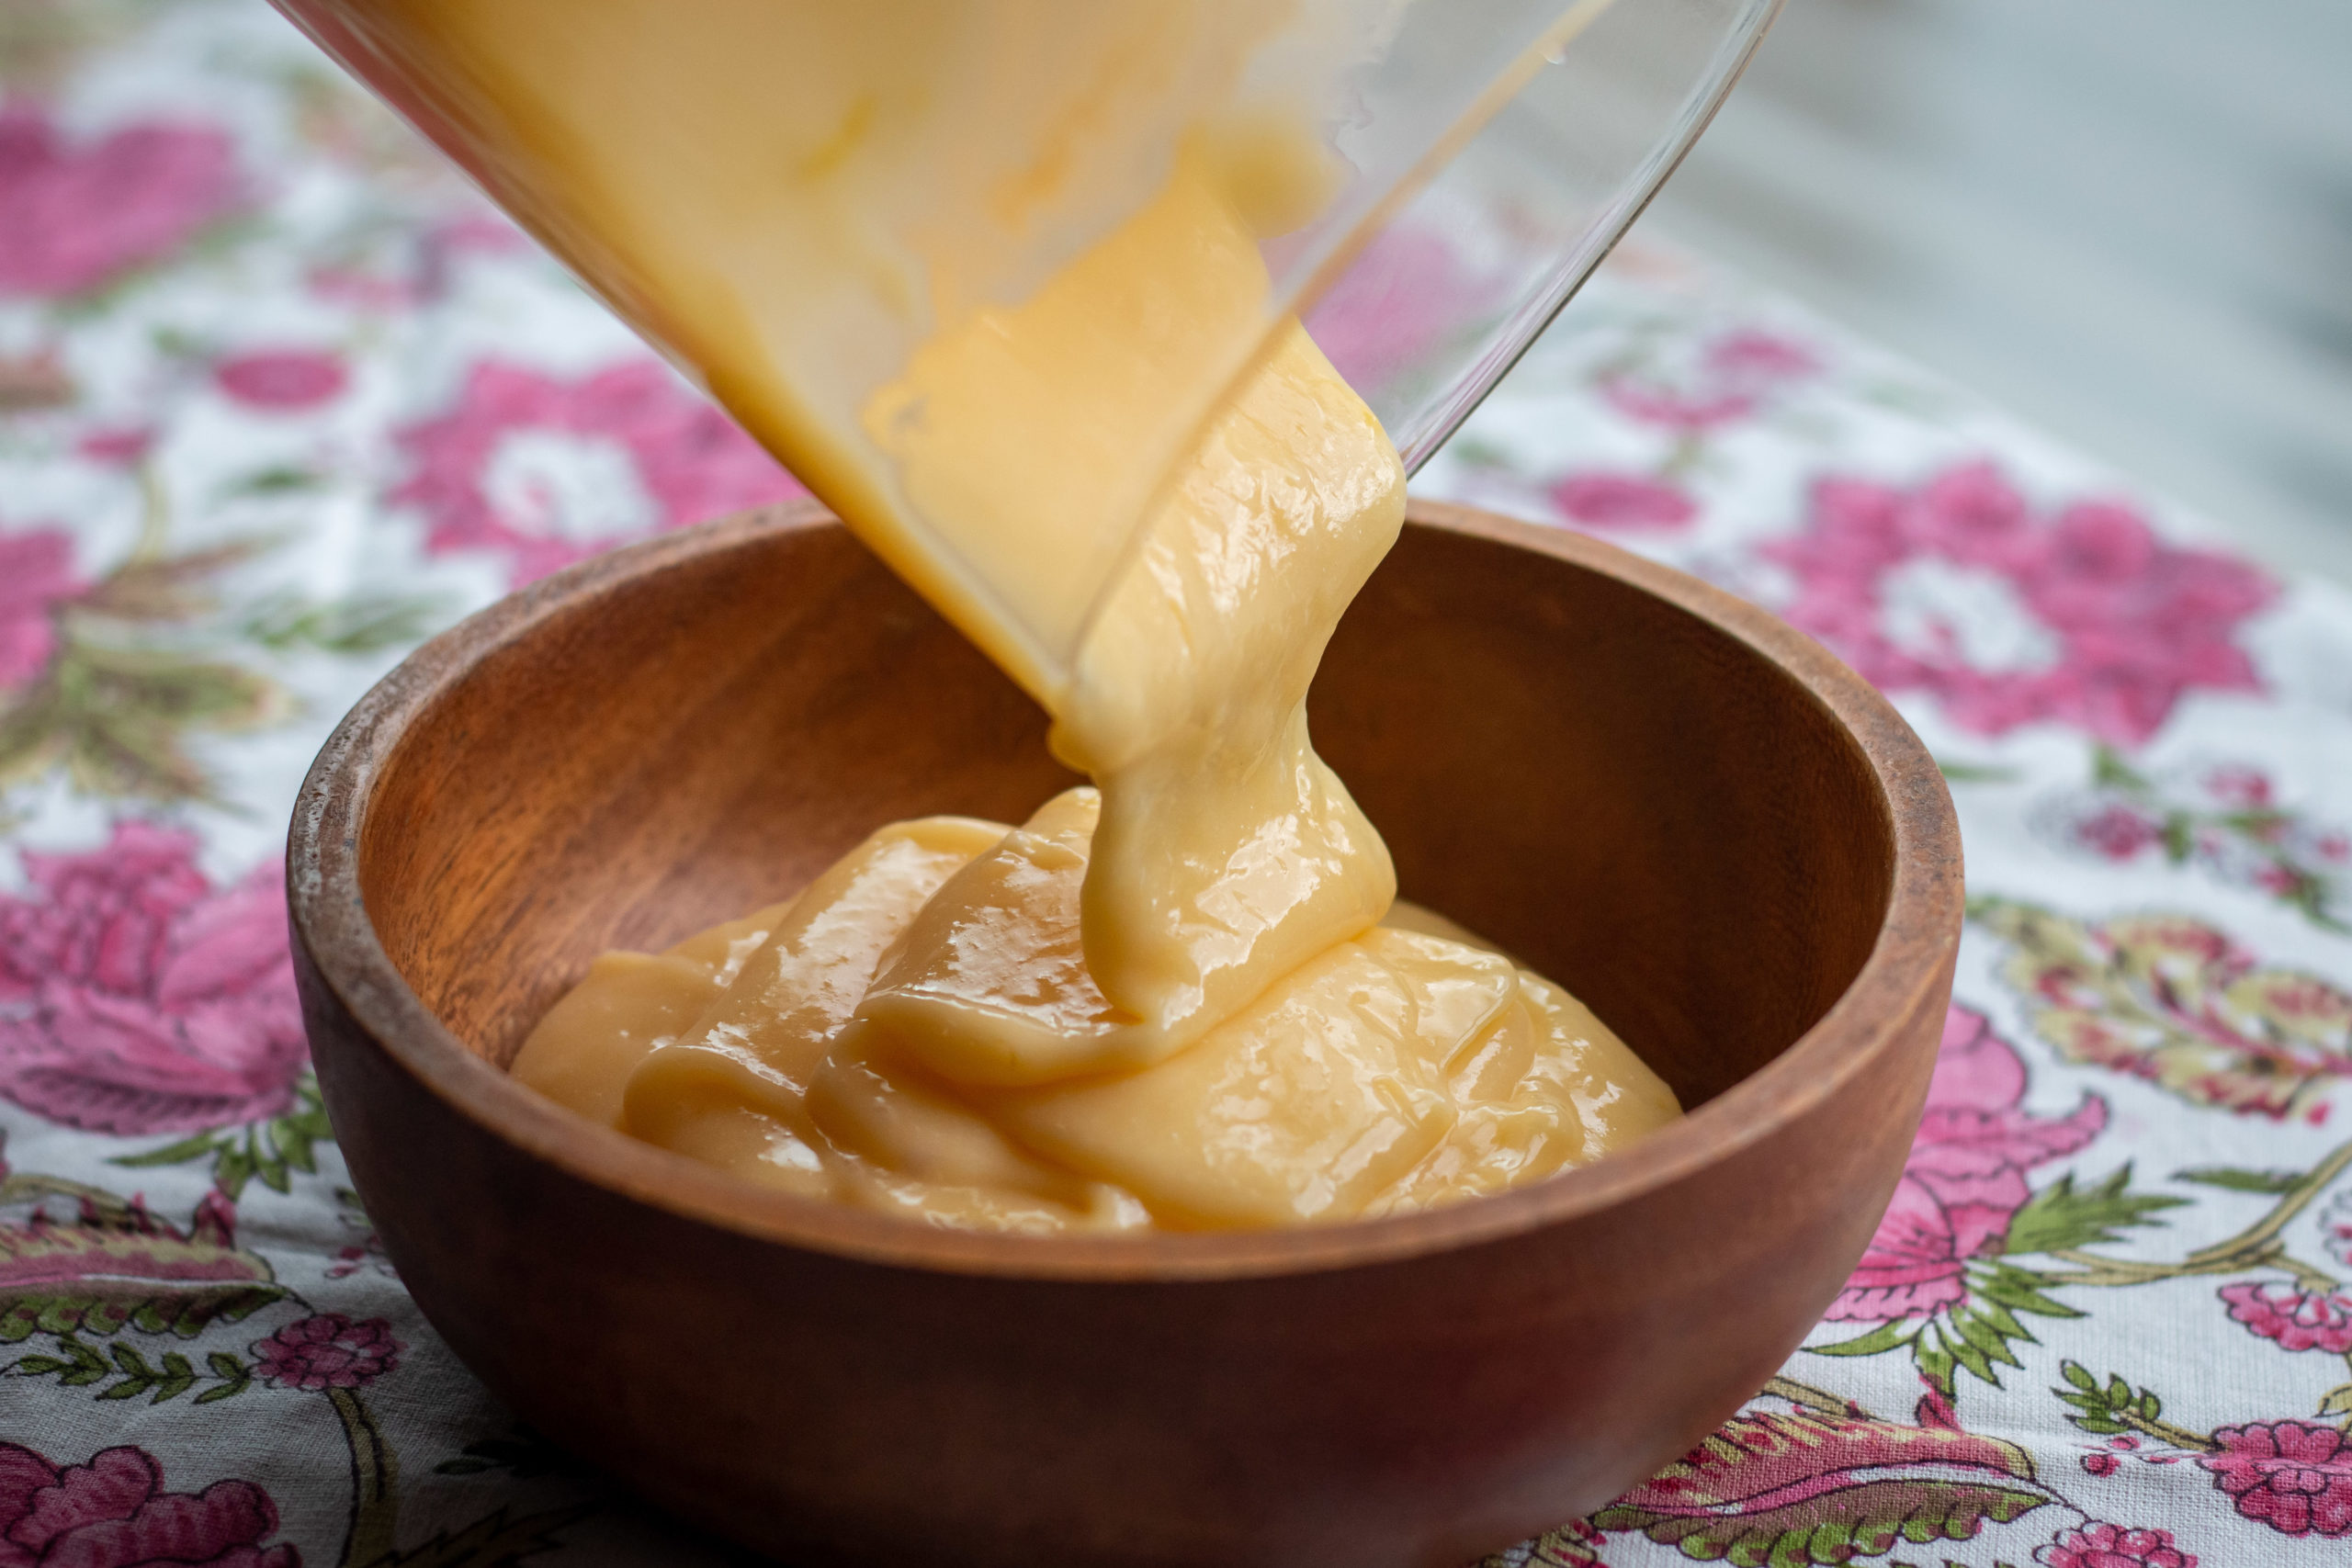 Lime curd being poured from a plastic container to a wooden bowl